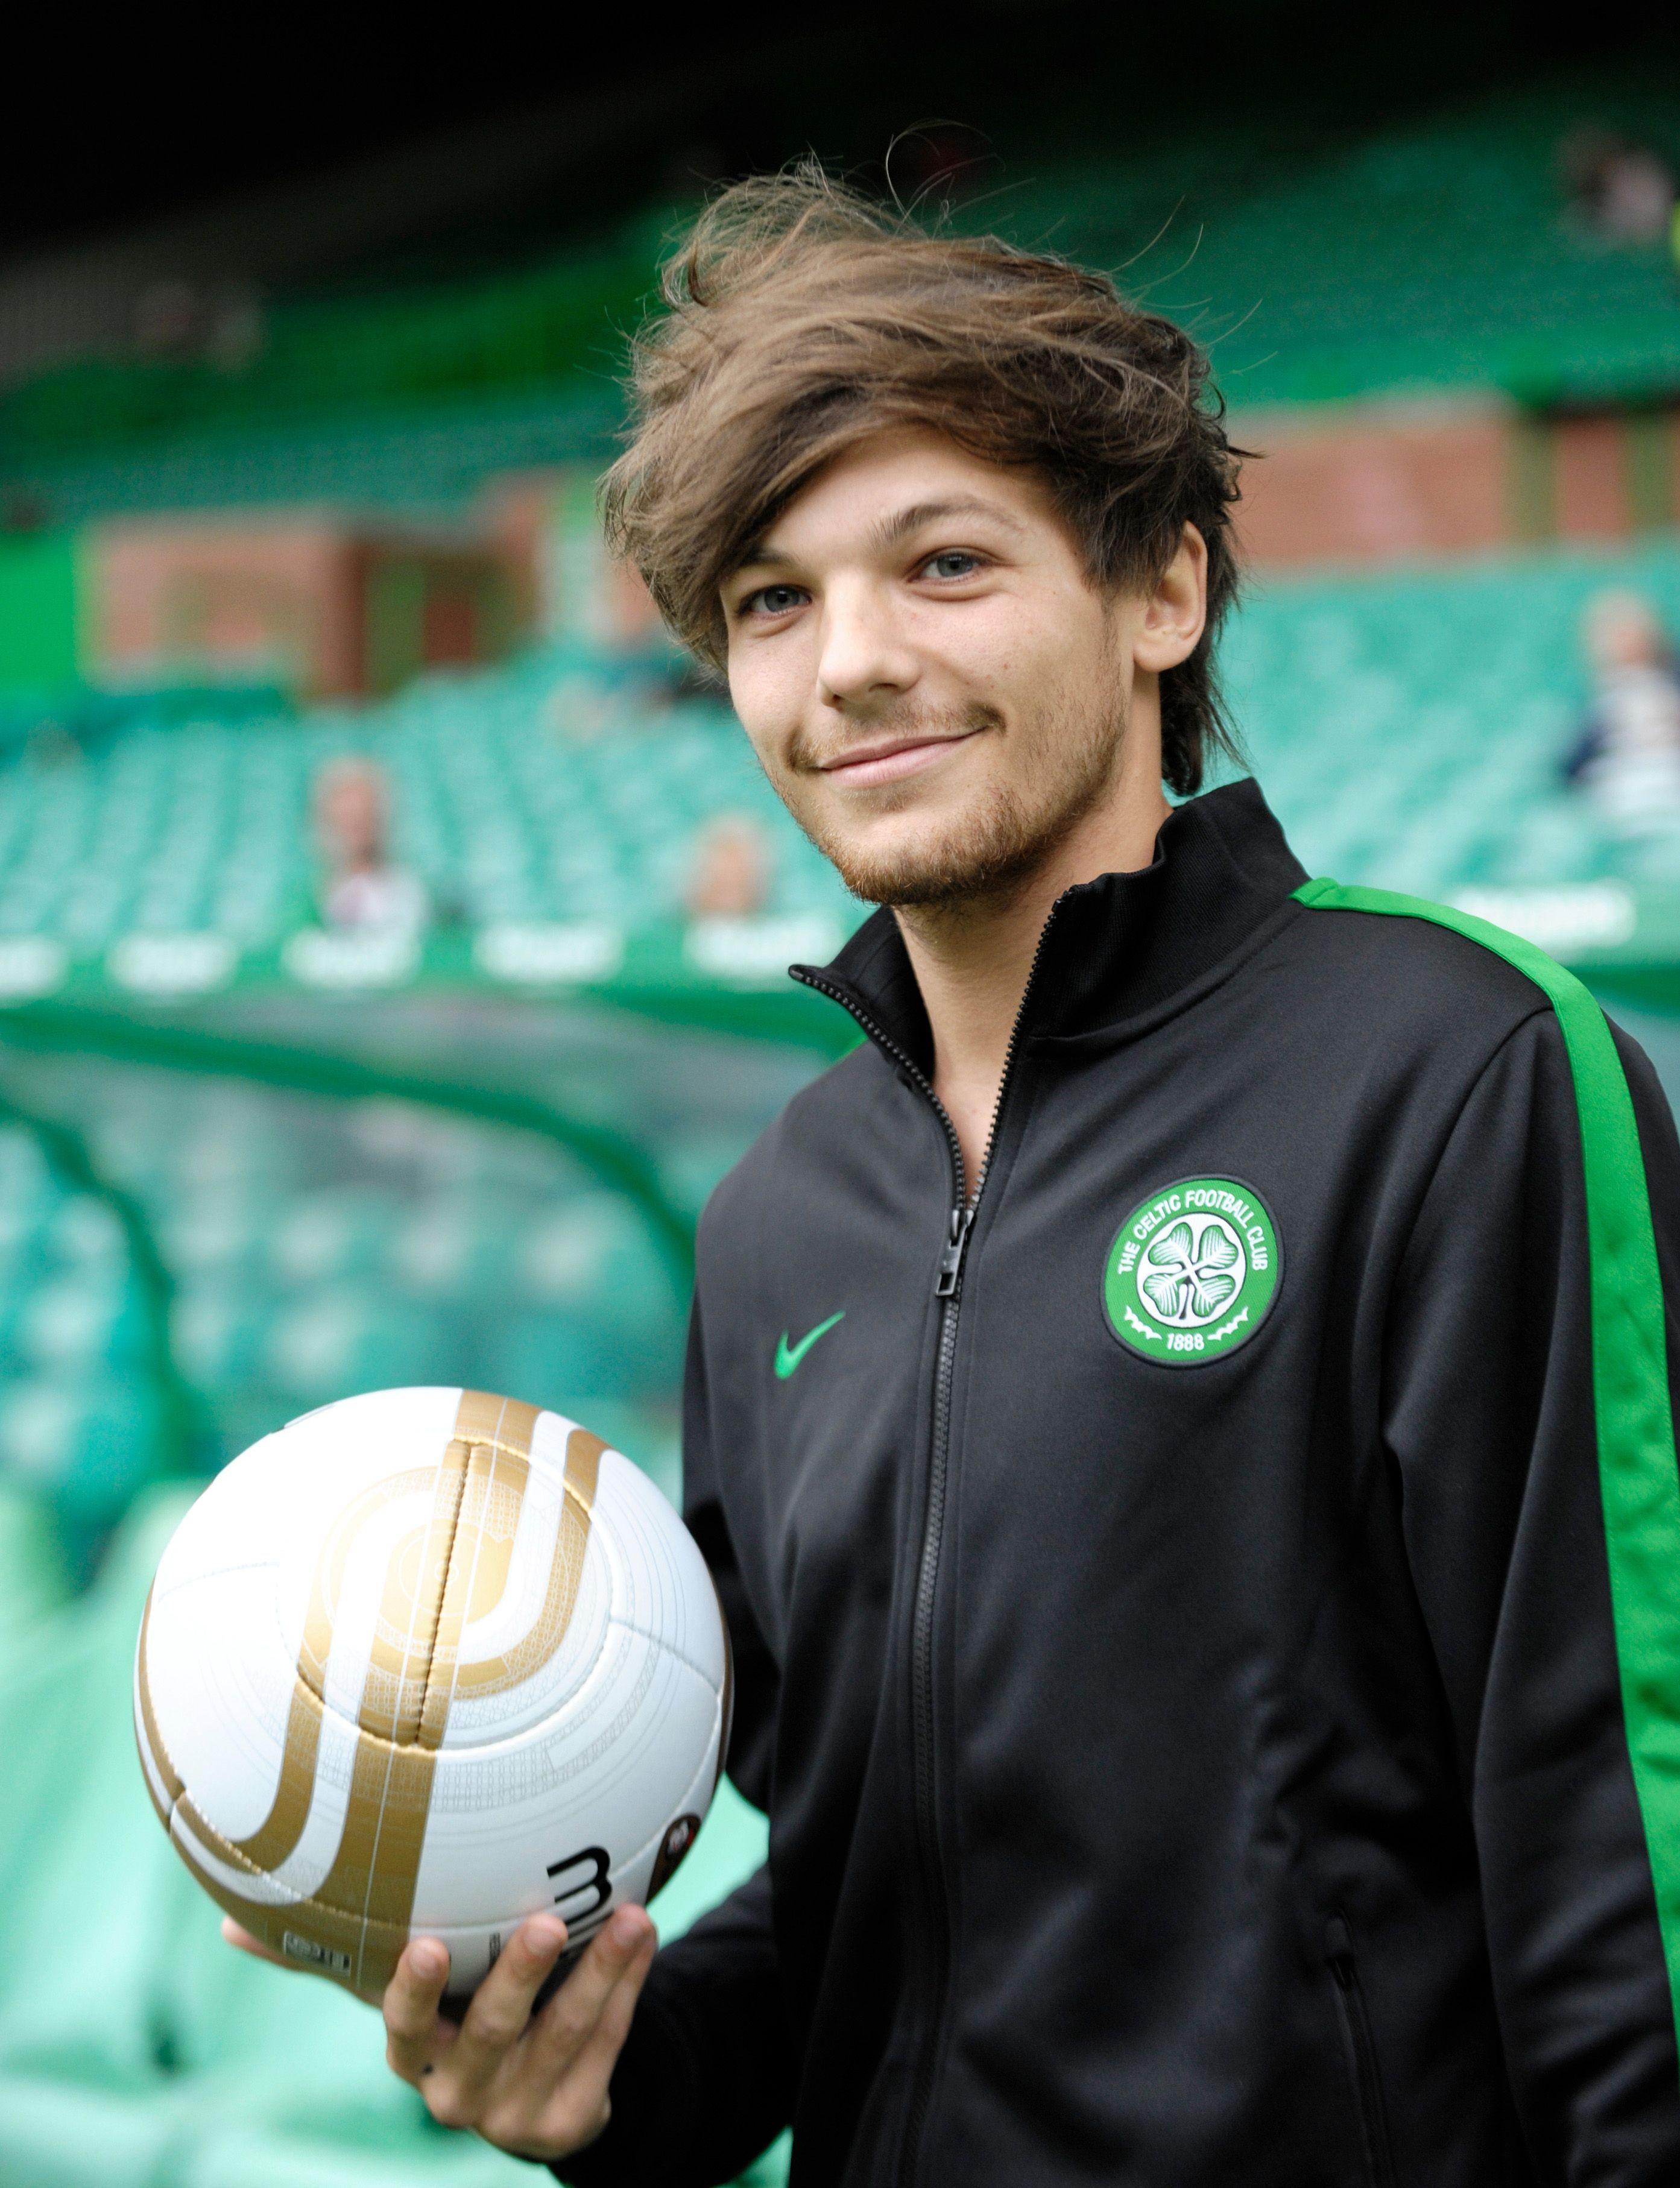 Louis Tomlinson Joins Soccer Aid for Charity Match Benefiting